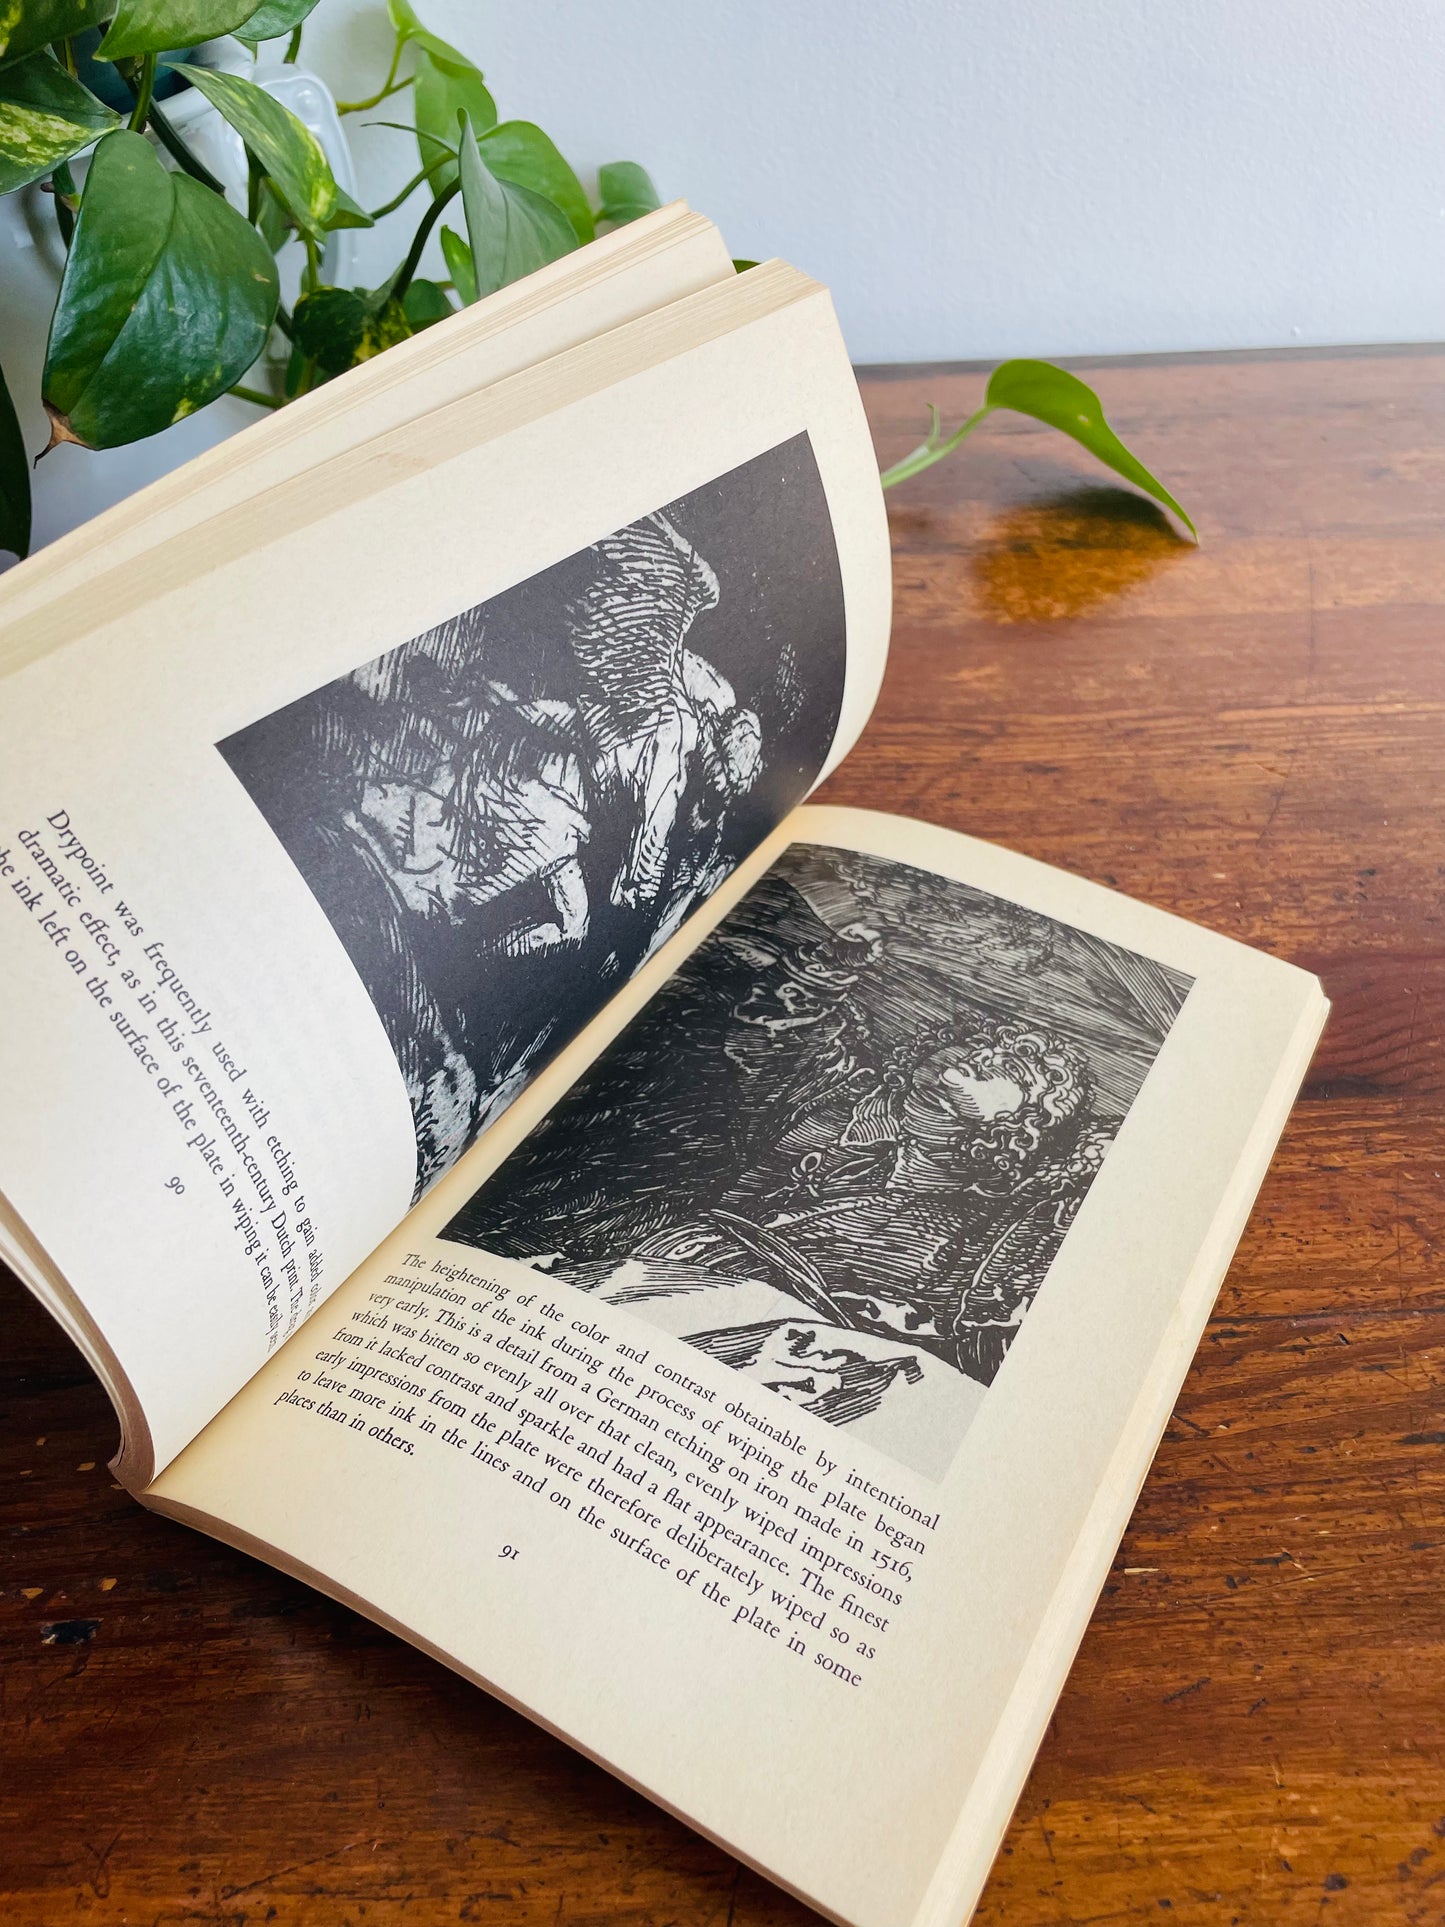 How Prints Look: Photographs with Commentary - Paperback Book (1943)